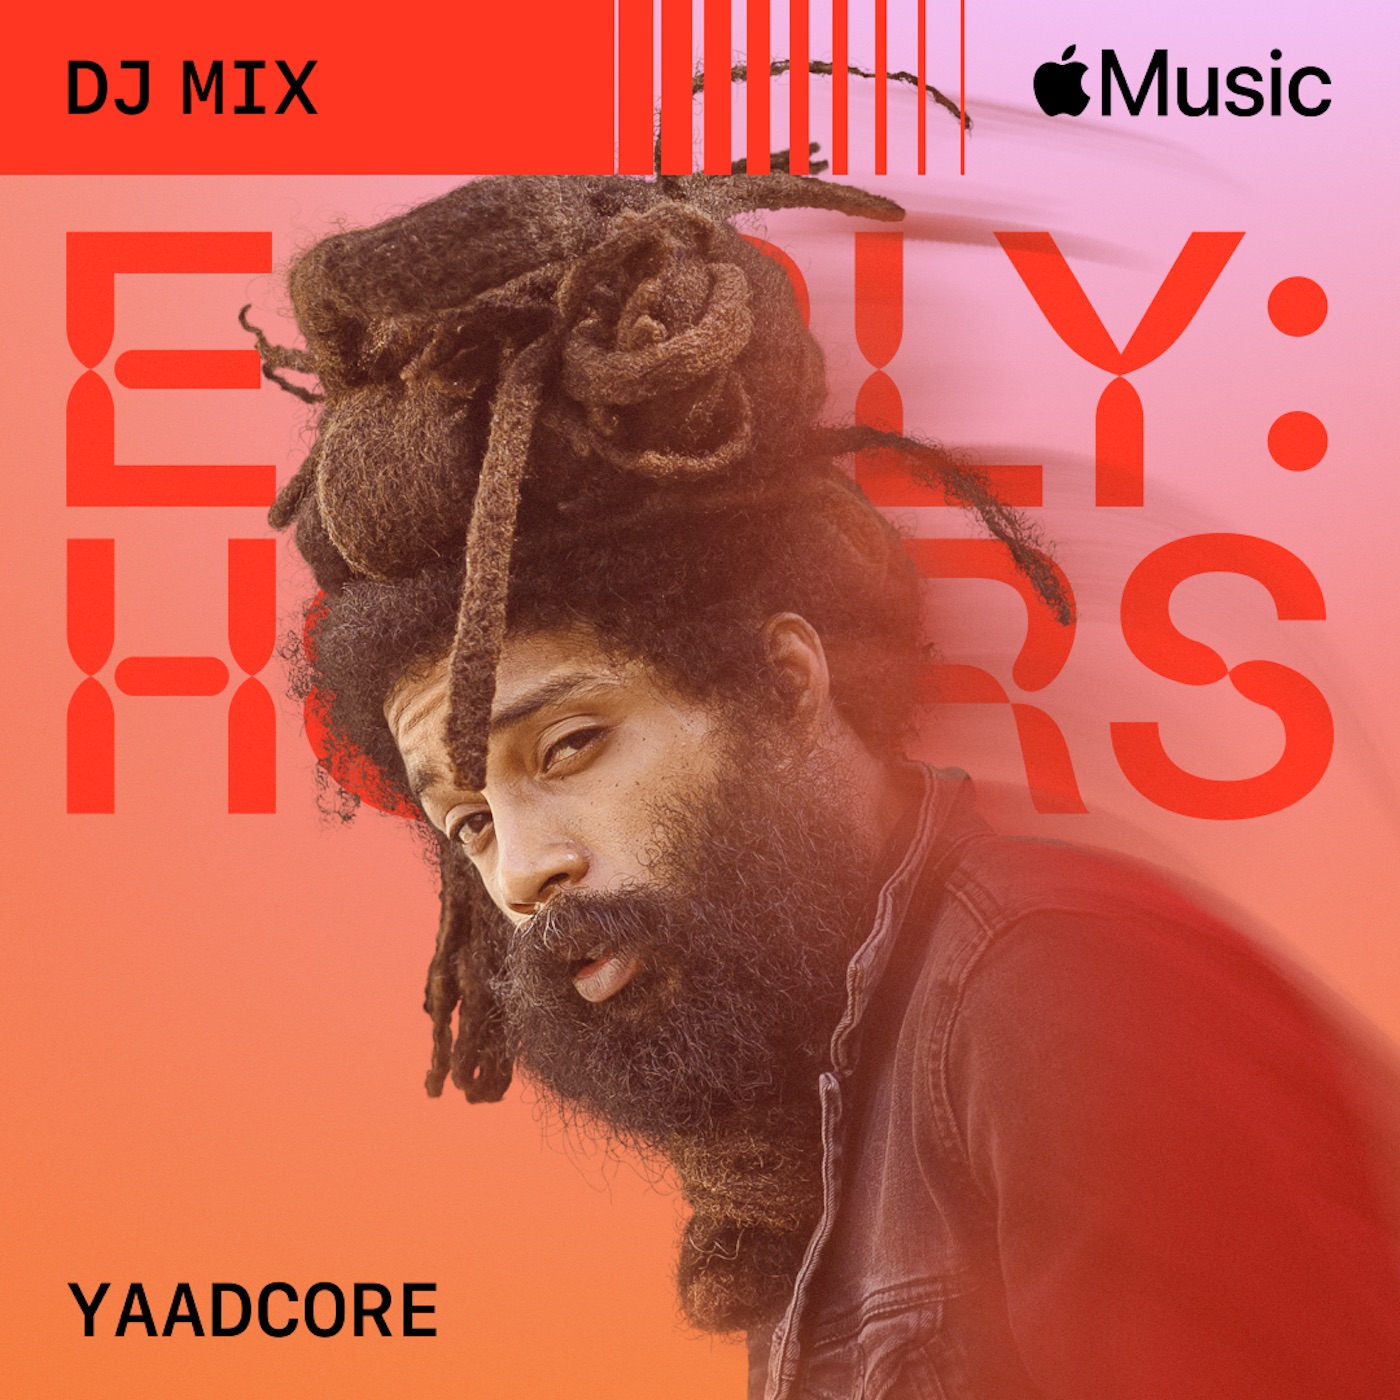 Early Hours (DJ Mix) by Yaadcore